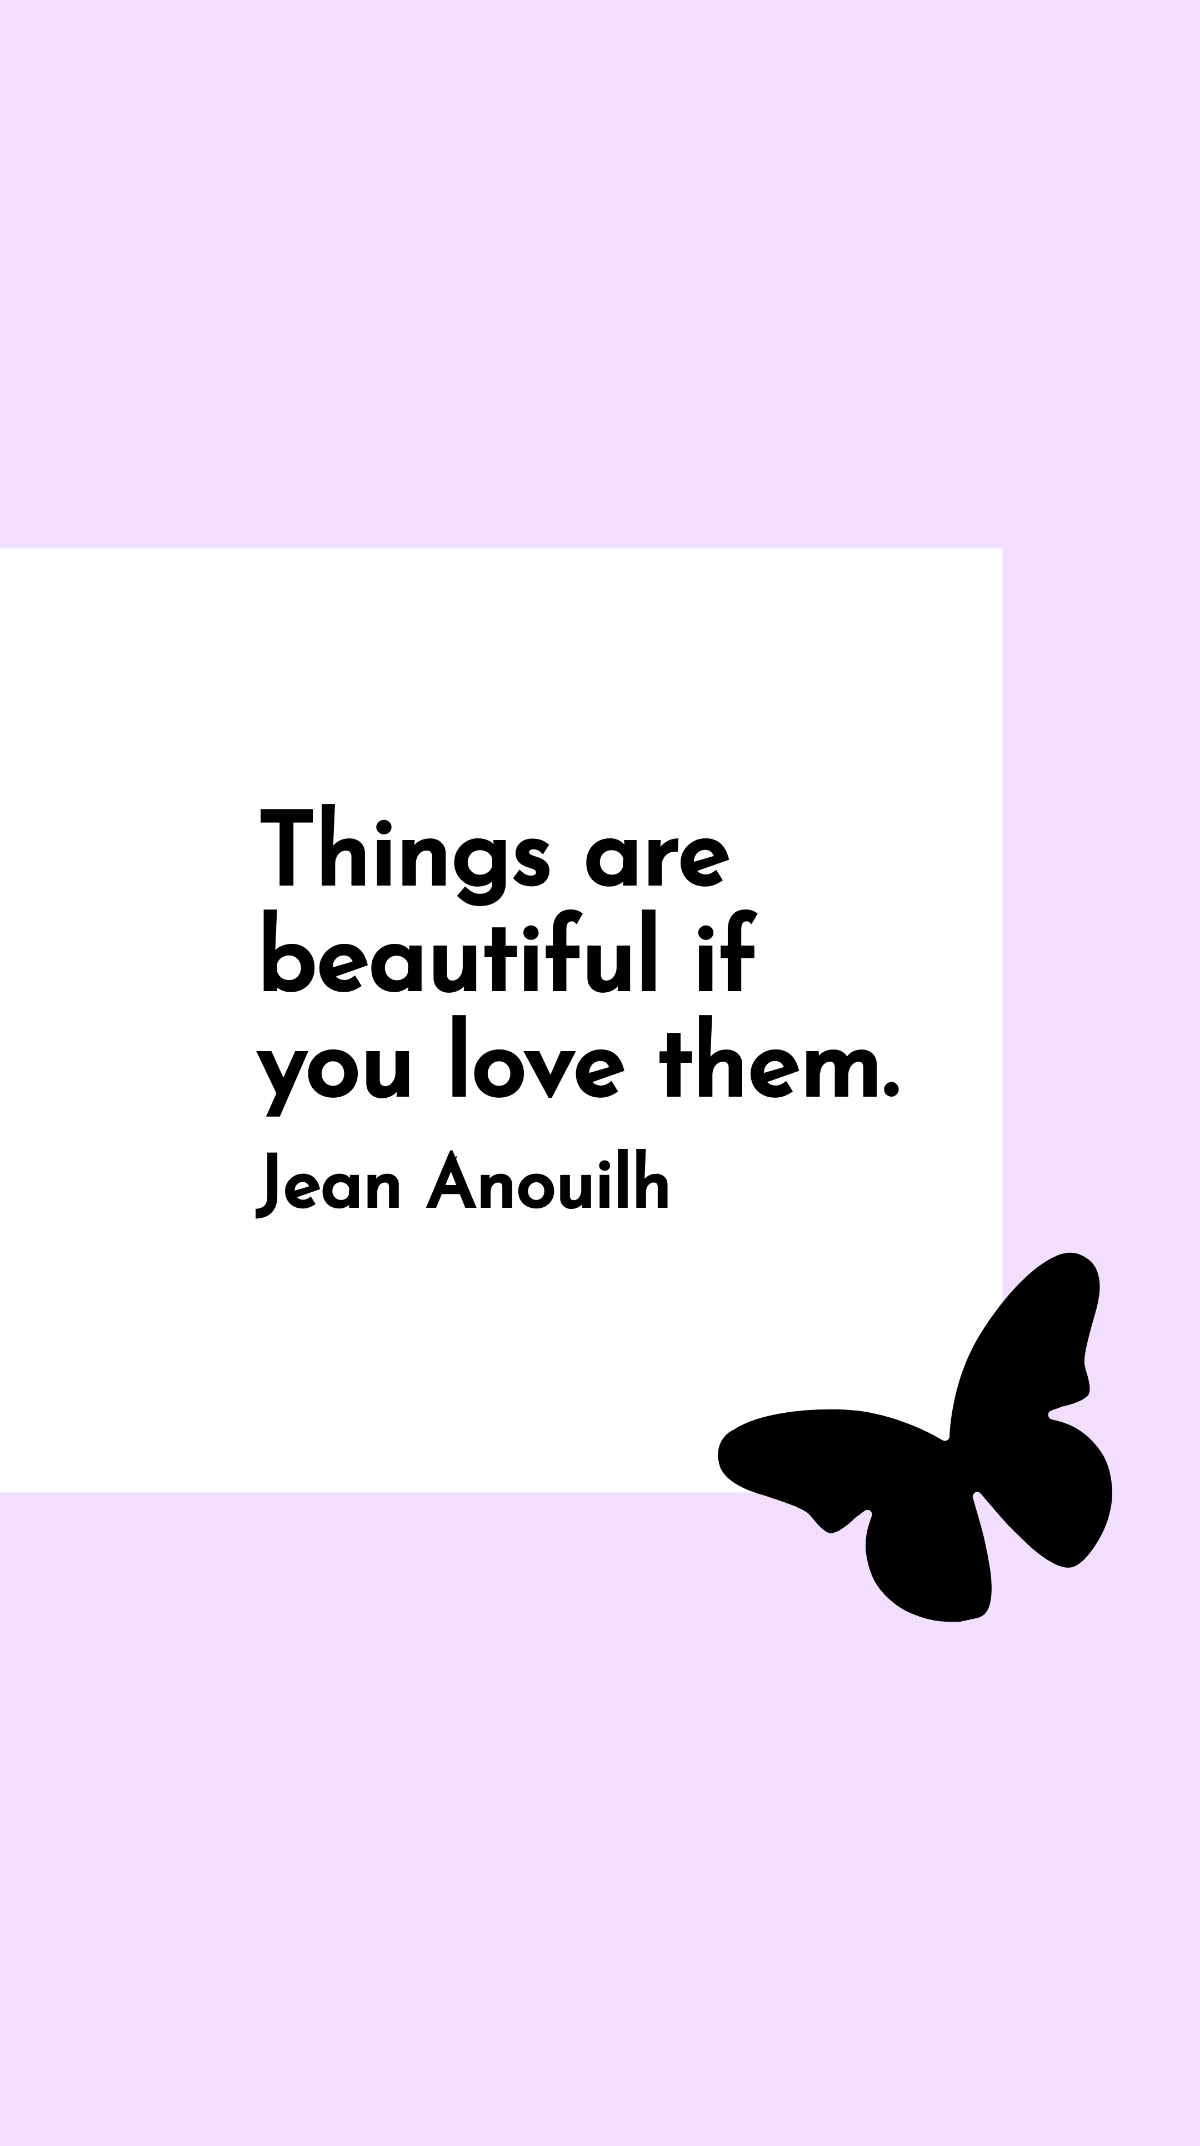 Jean Anouilh - Things are beautiful if you love them.